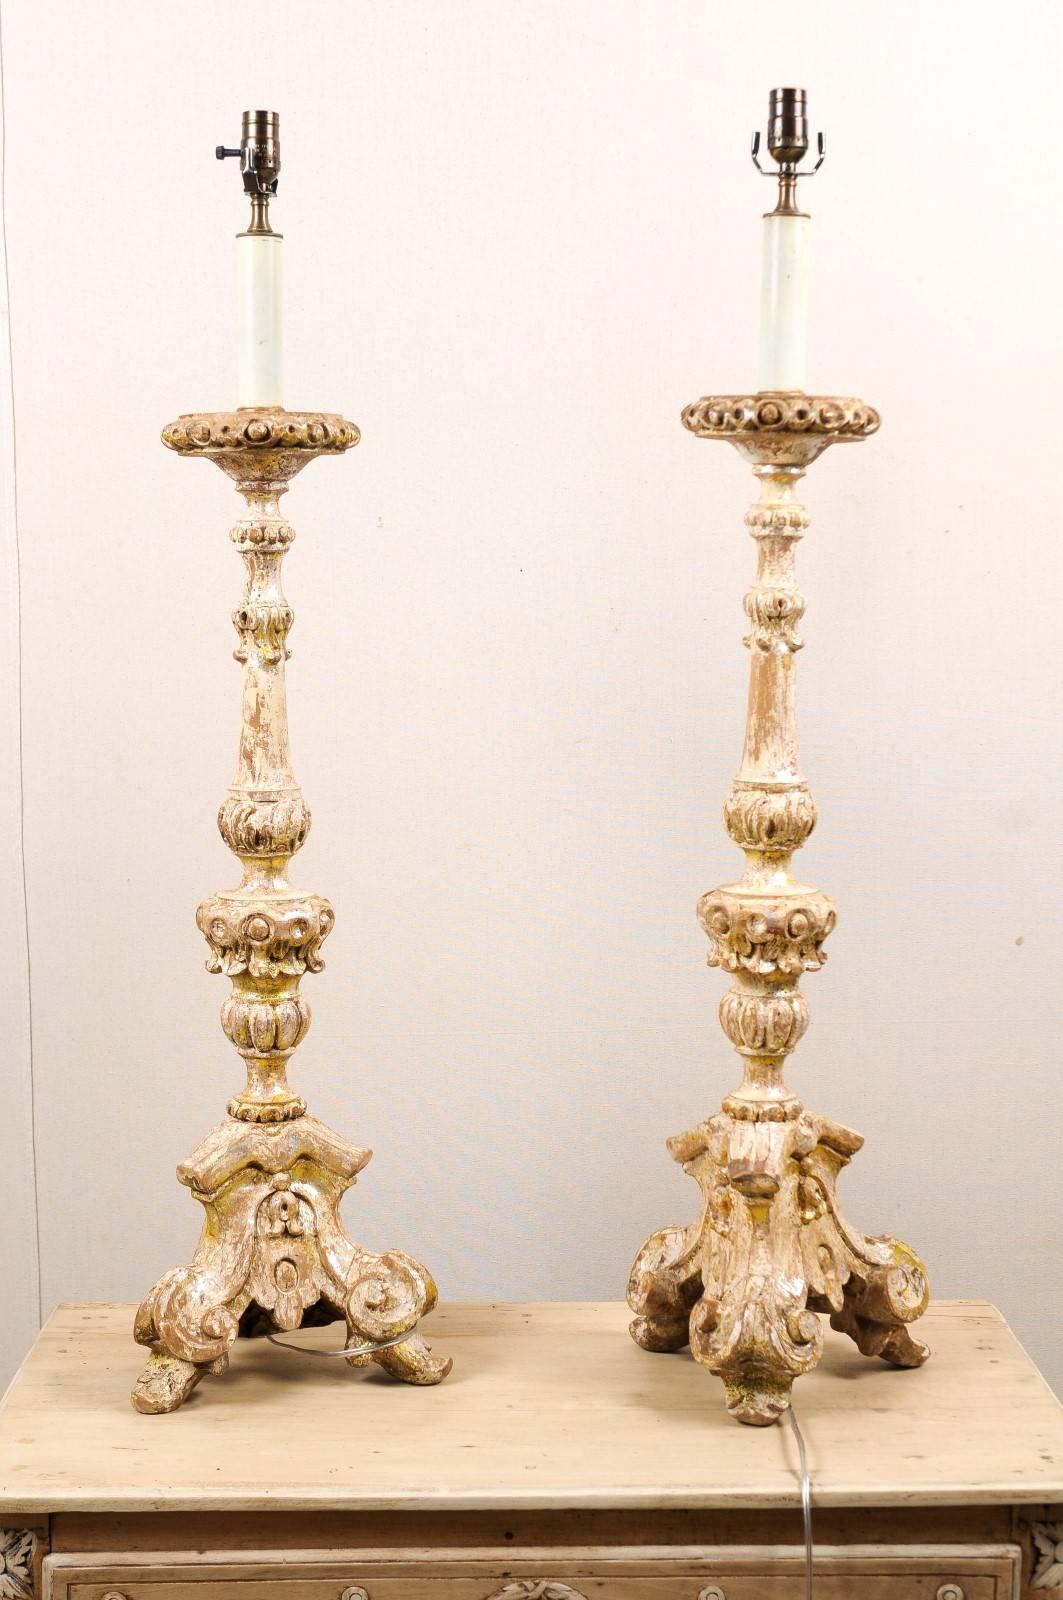 Pair of Table Lamps Made from 19th Century Wood Altar Sticks, Silver Finish 1